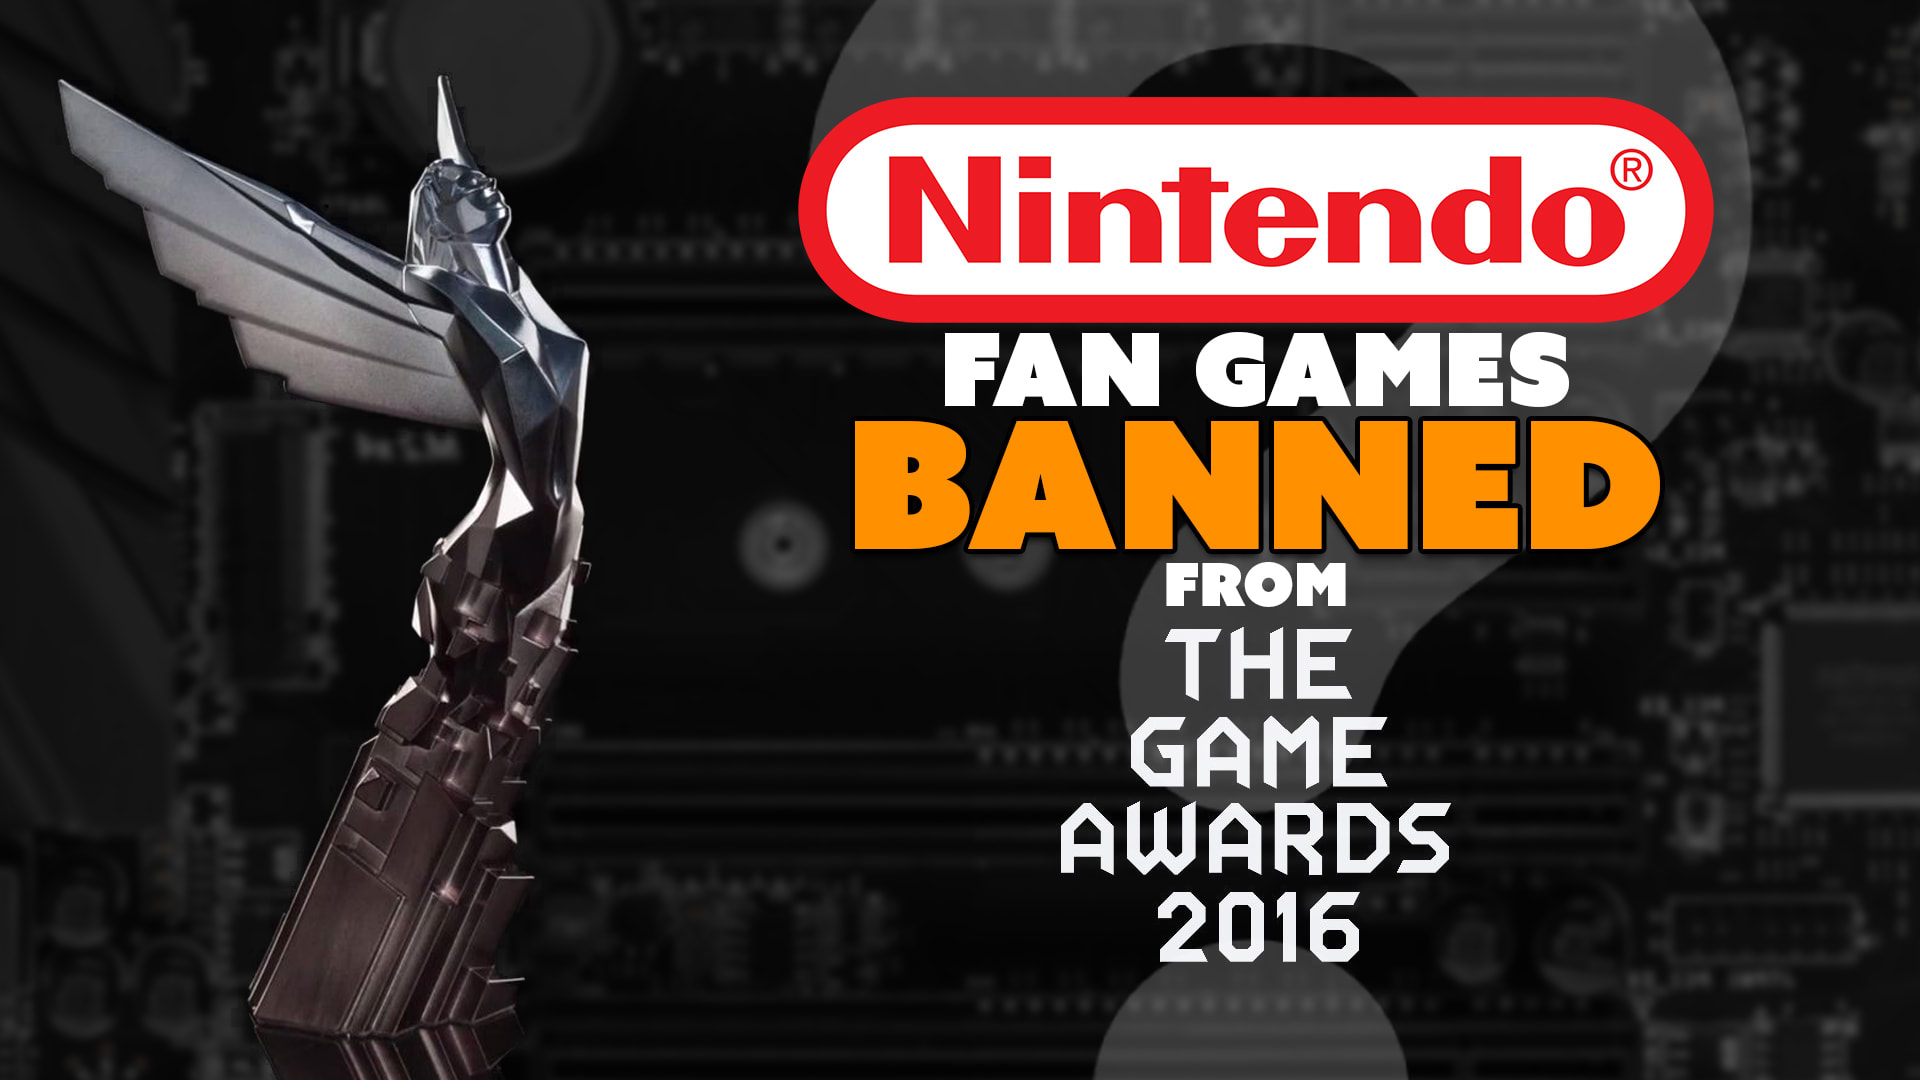 Nintendo-related nominees dropped from Game Awards 2016 'Best Fan